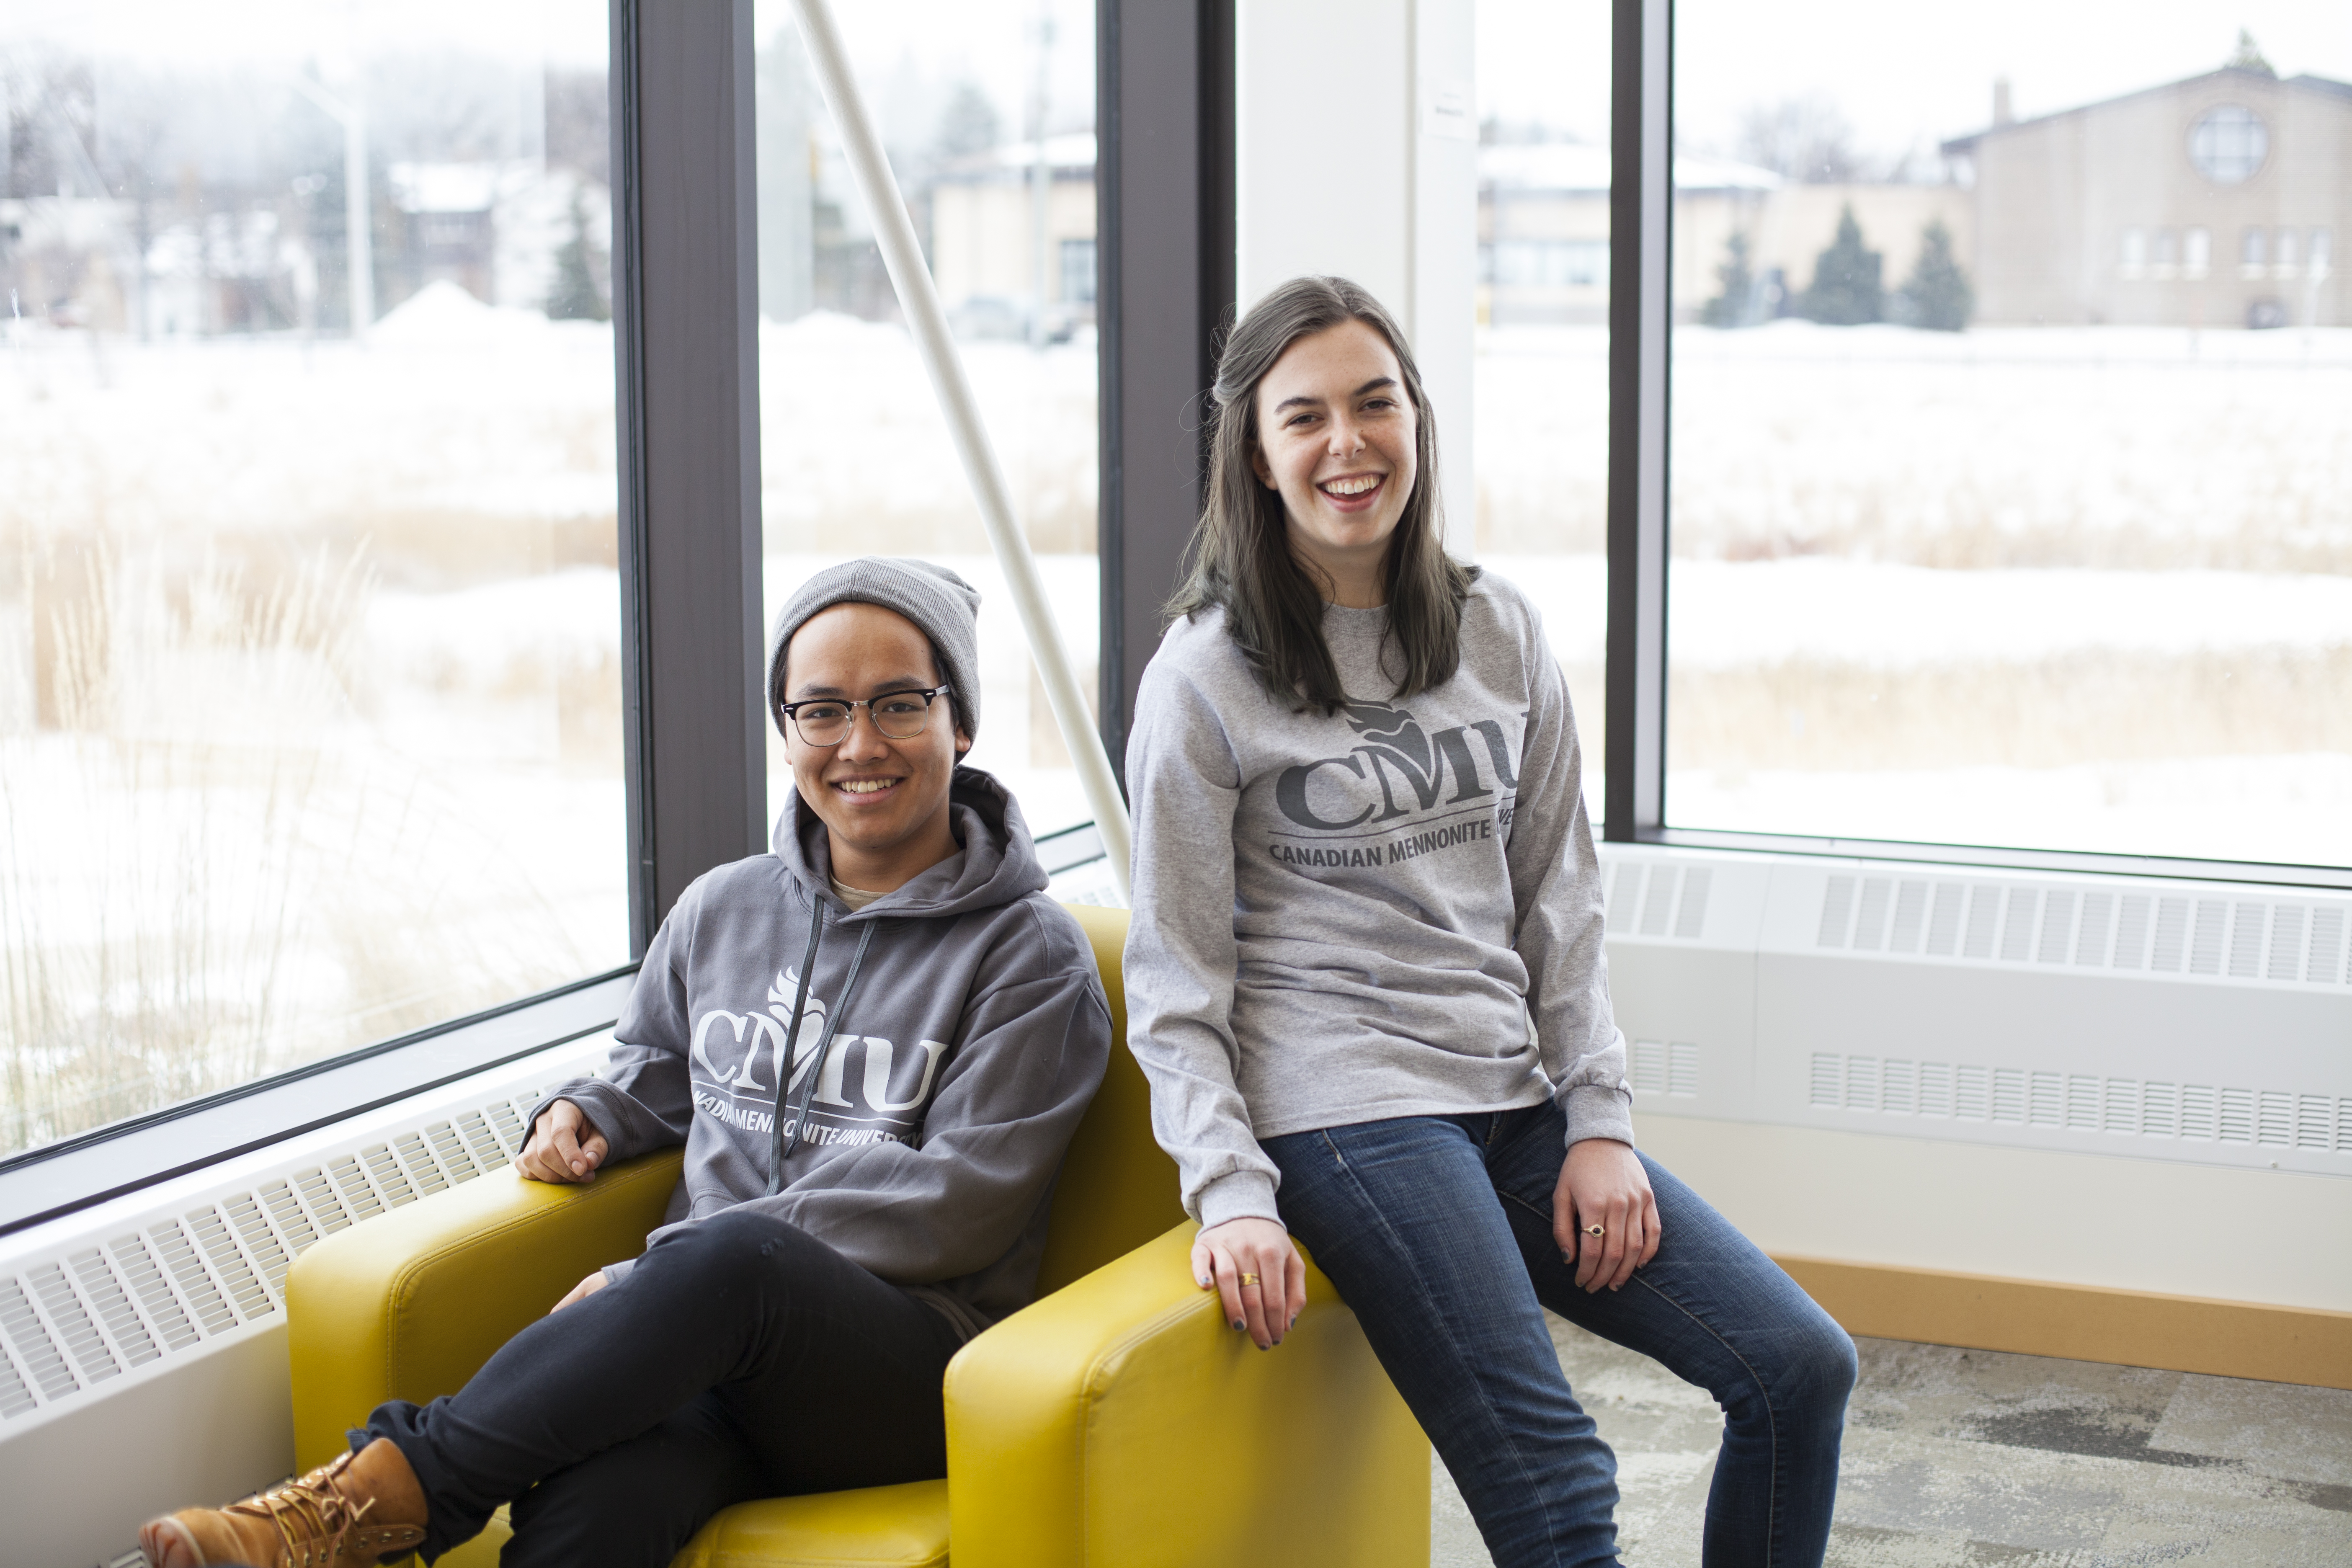 CMU students pose in the library